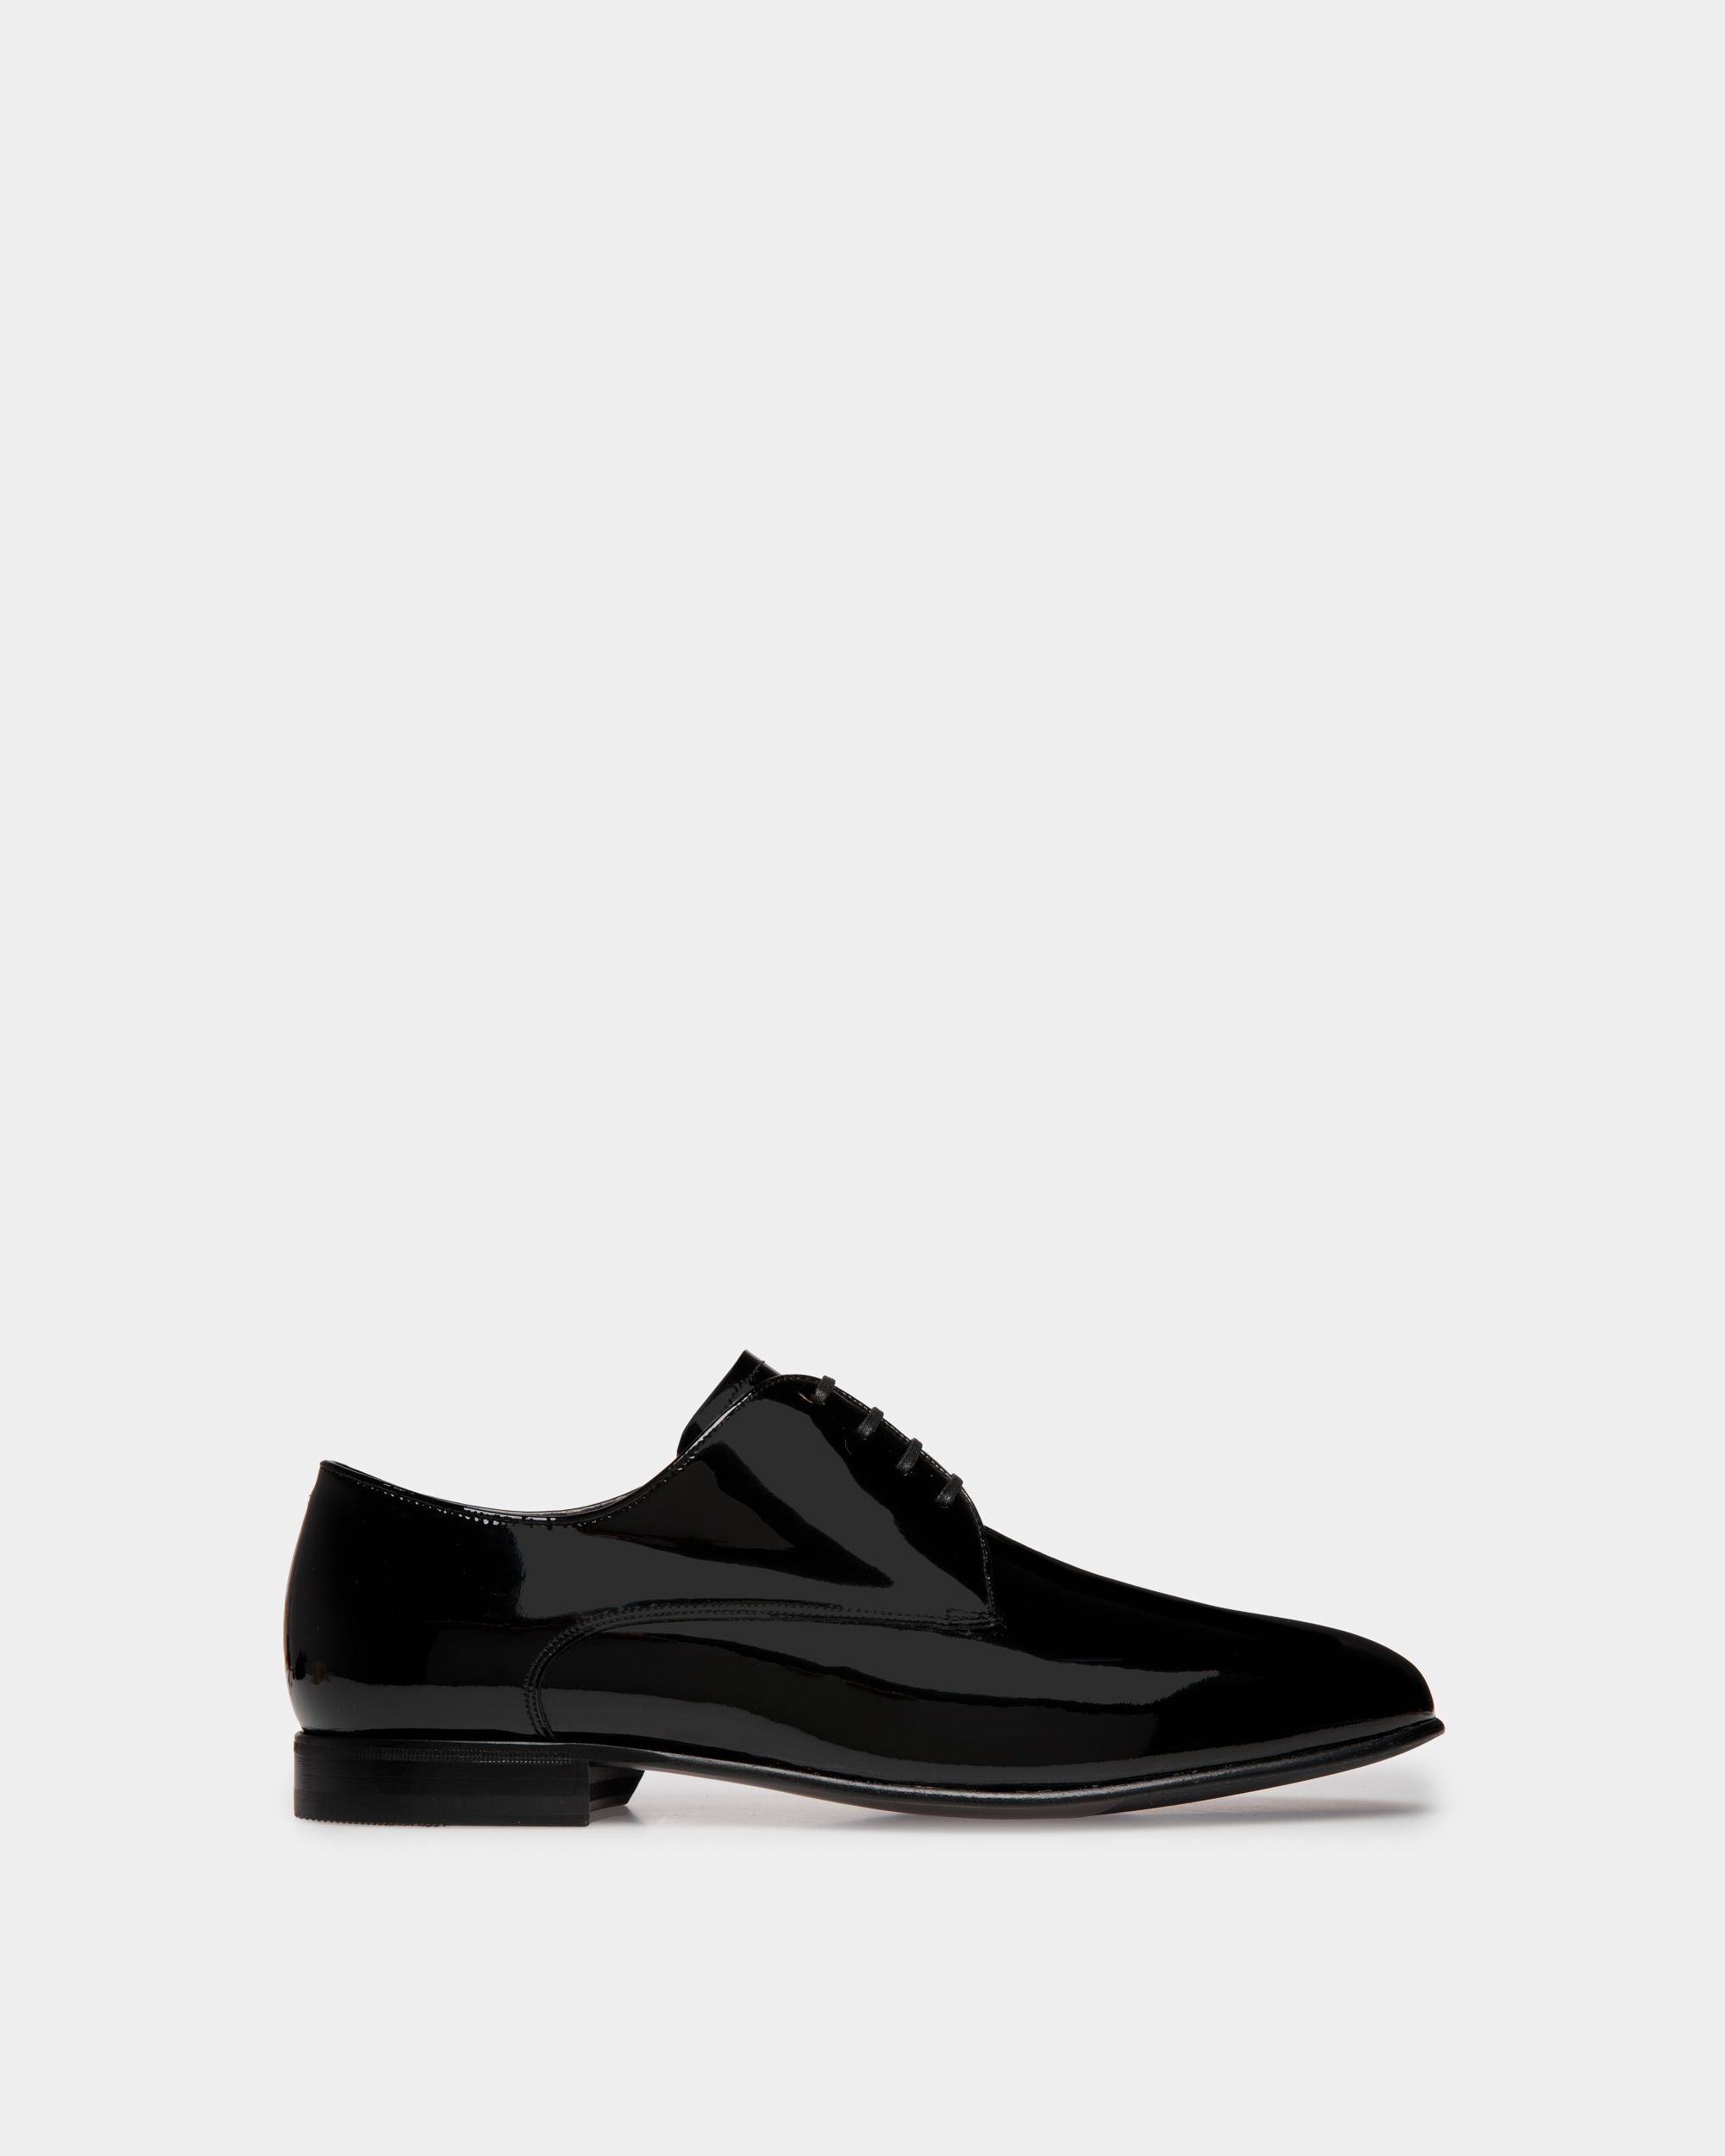 Suisse | Men's Derby in Black Patent Leather | Bally | Still Life Side